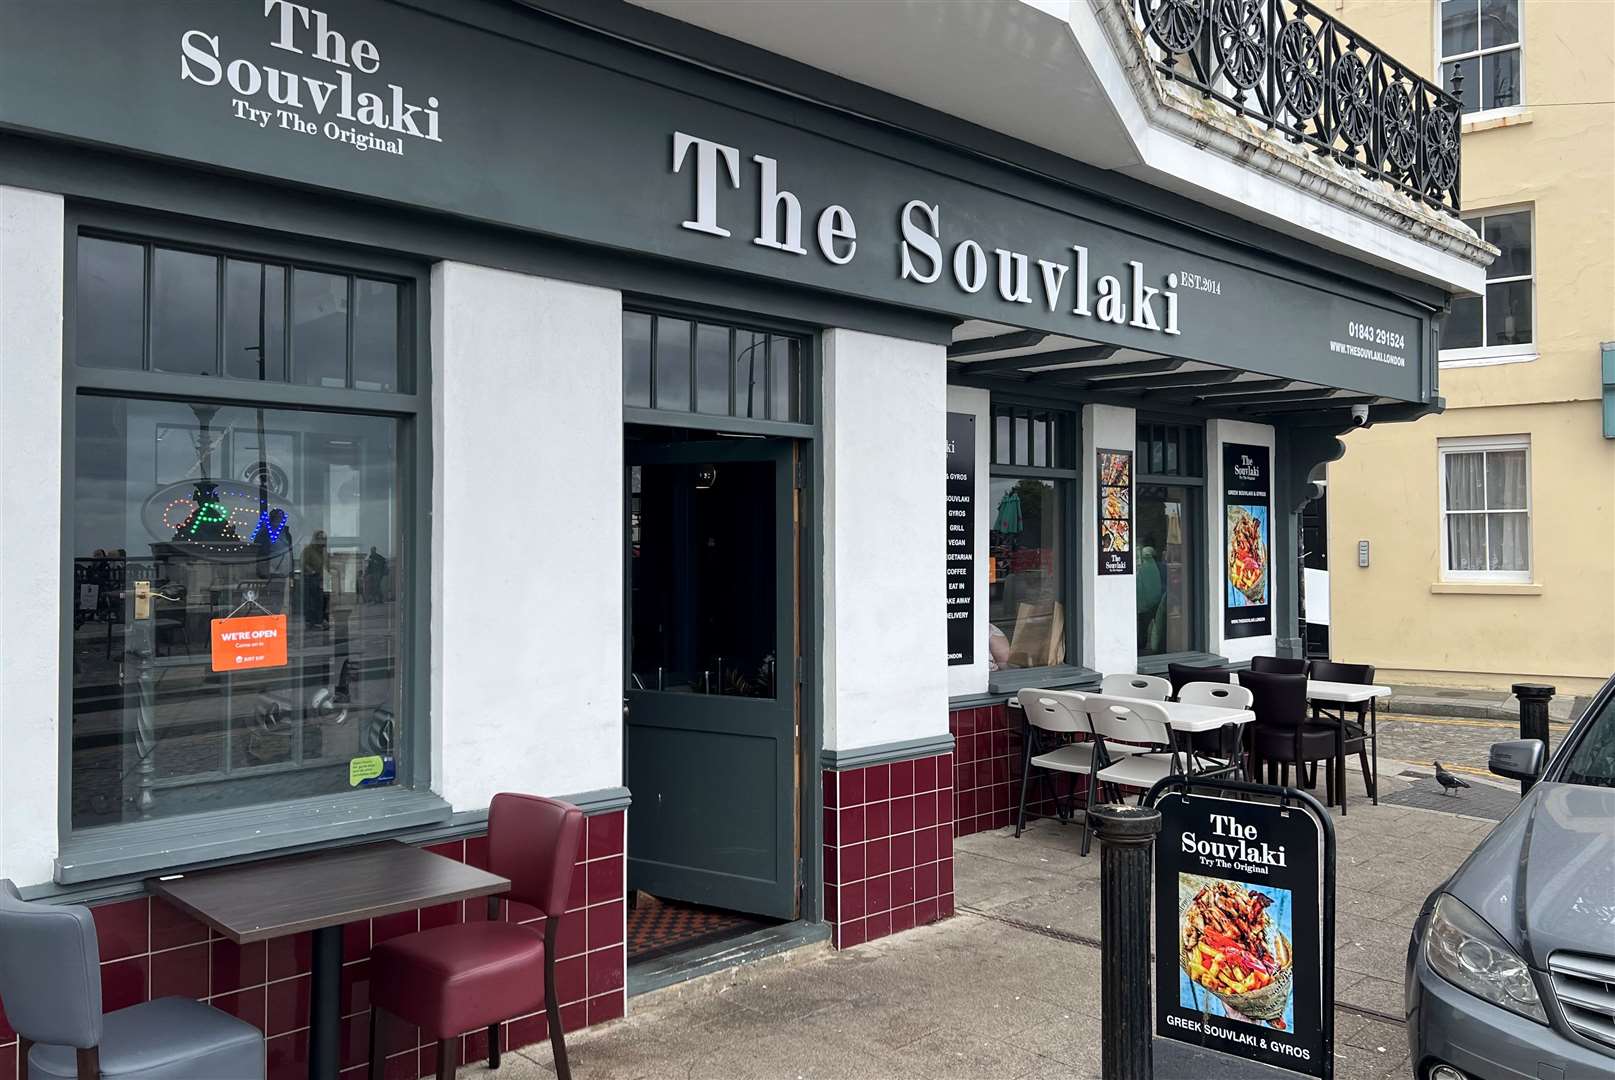 The Souvlaki is a new addition to Margate's culinary line-up